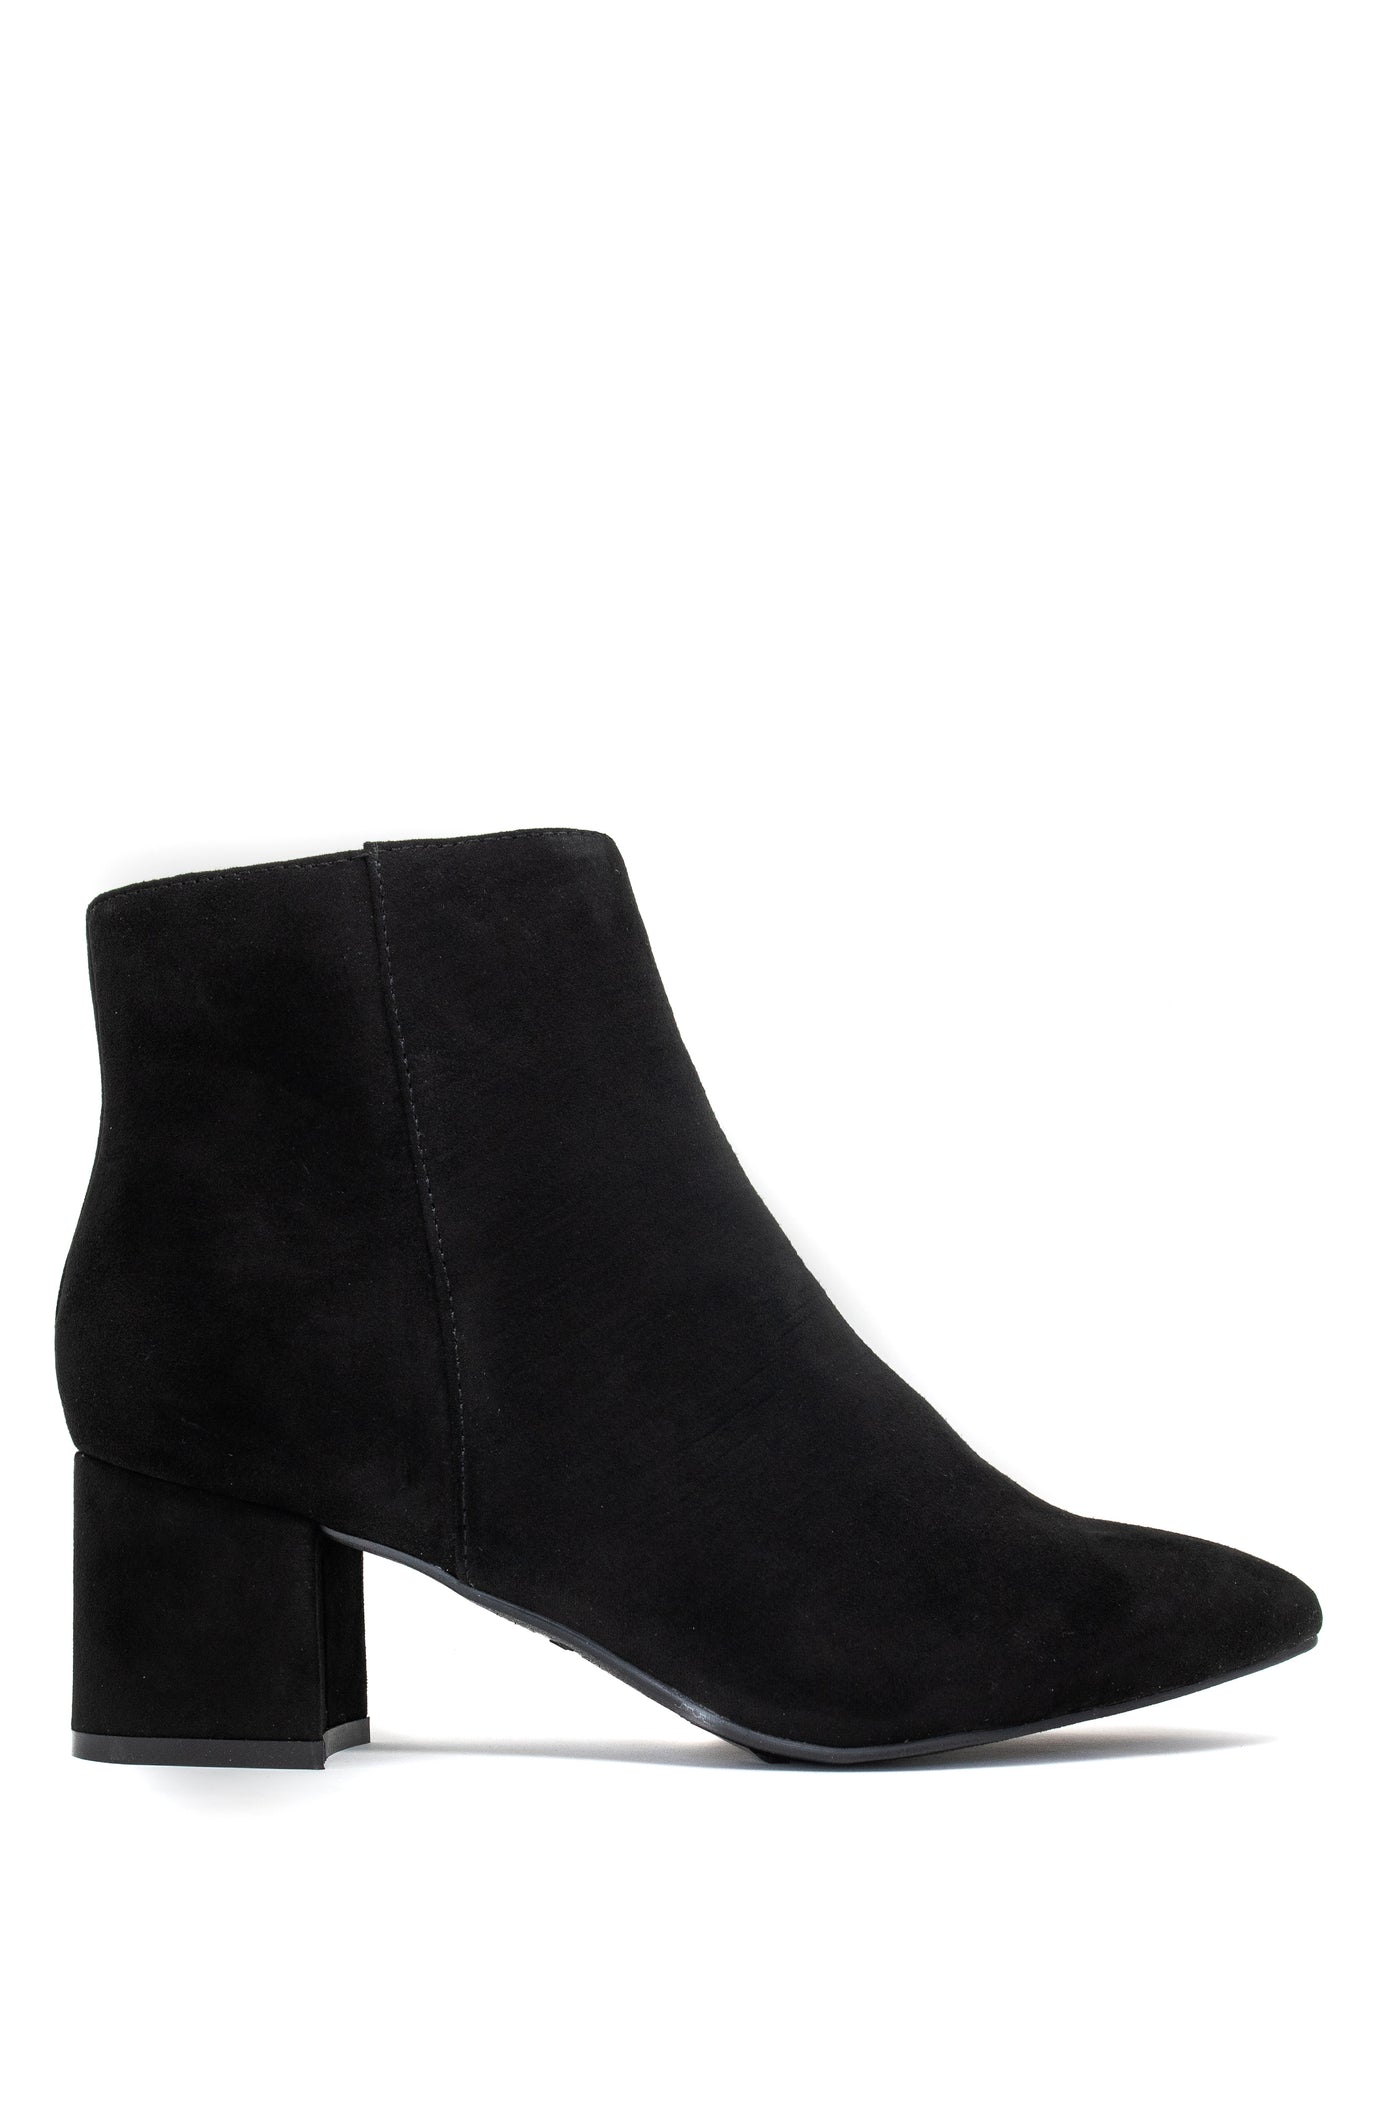 Keep In Touch - Black Booties